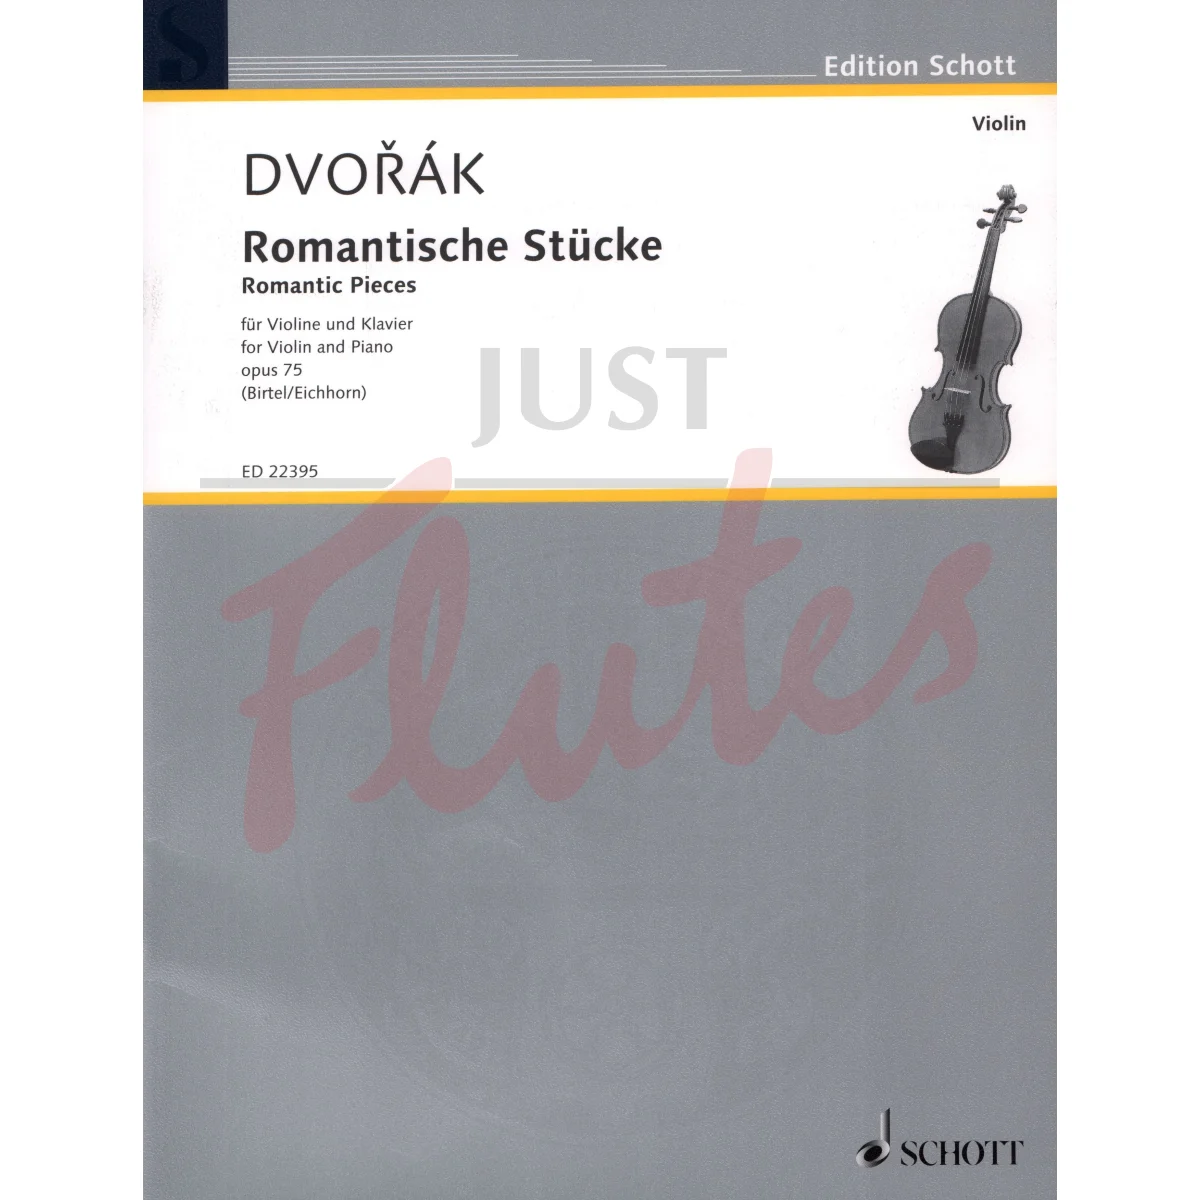 Romantic Pieces for Violin and Piano